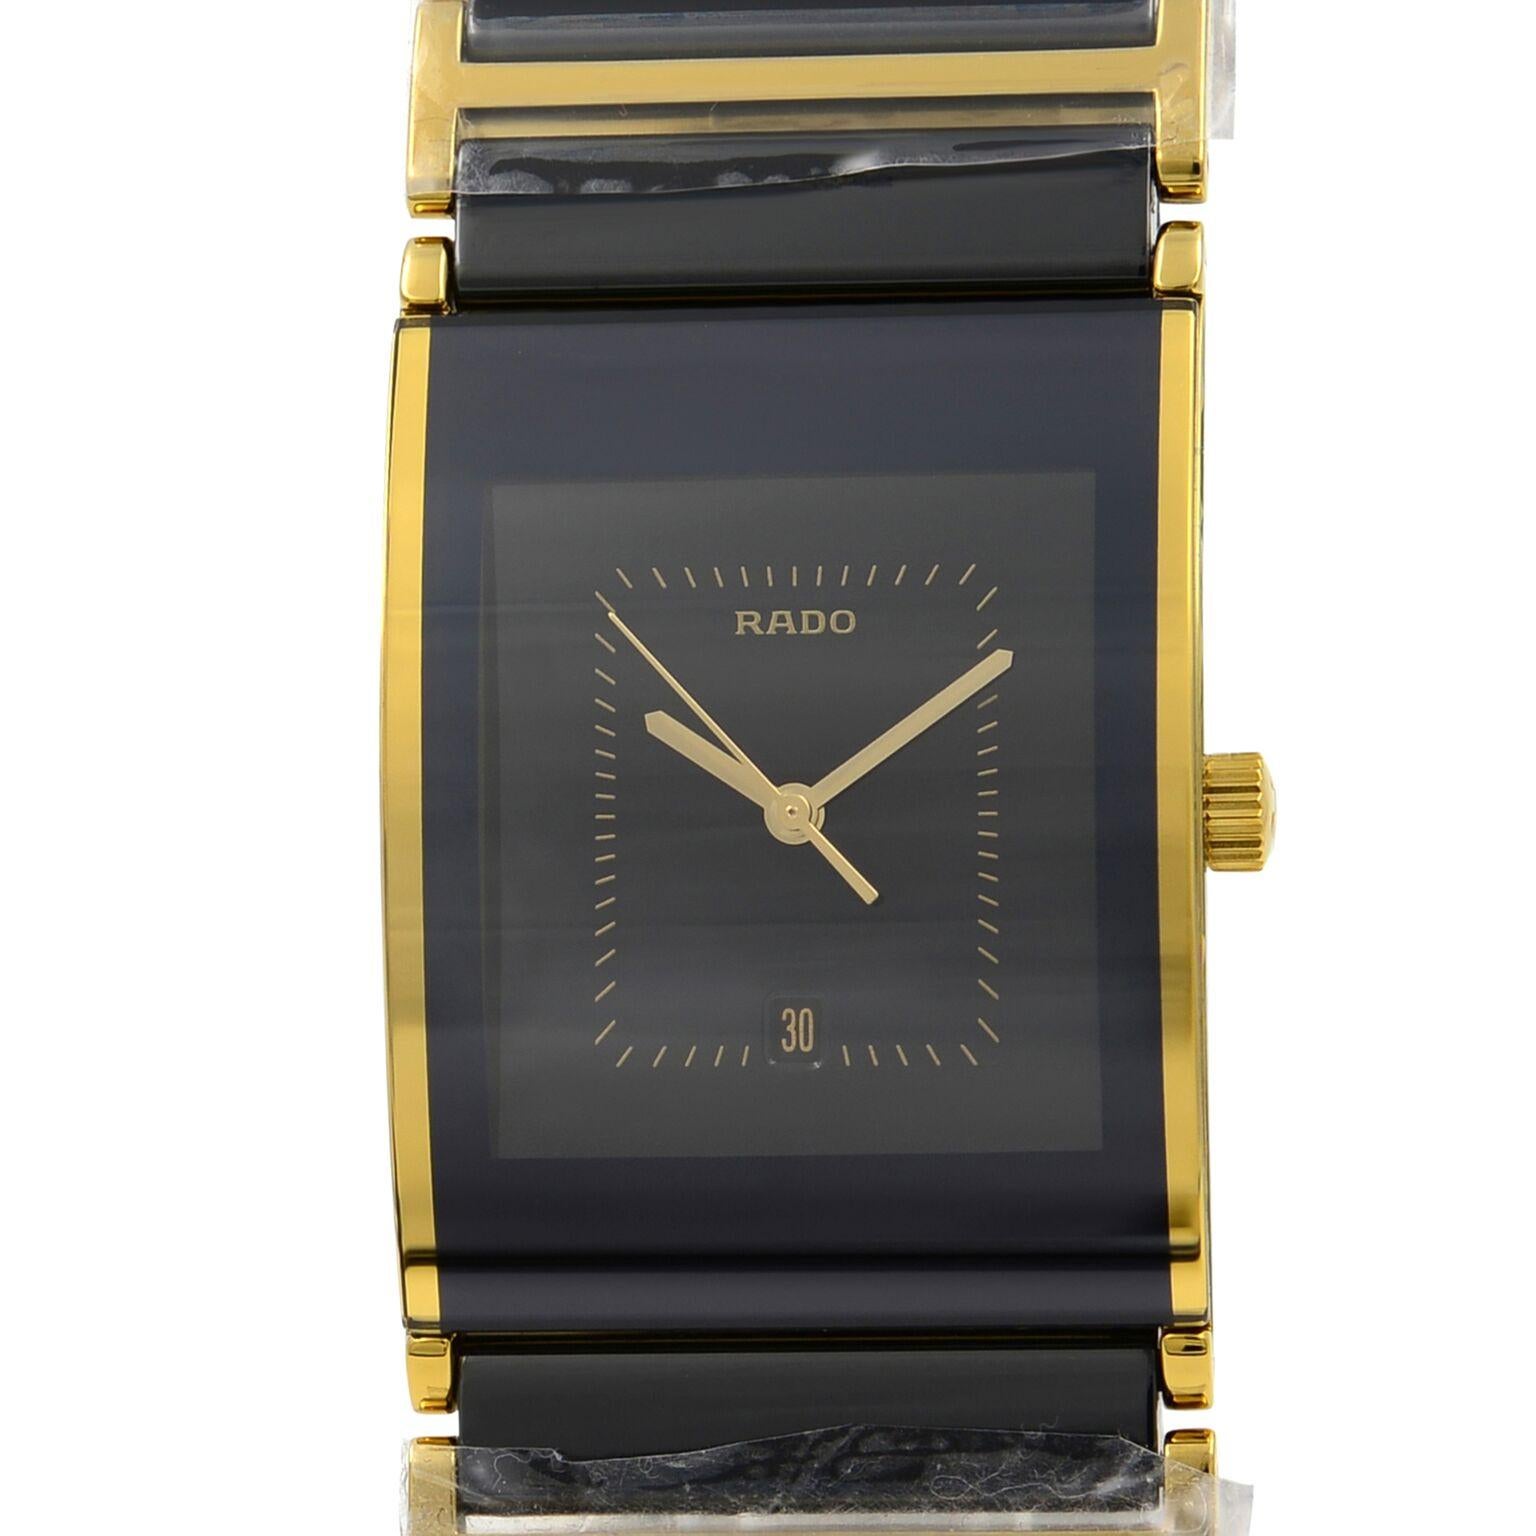 This brand new Rado Integral R20787402 is a beautiful men's timepiece that is powered by quartz (battery) movement which is cased in a stainless steel case. It has a  rectangle shape face, date indicator dial and has hand sticks, unspecified style